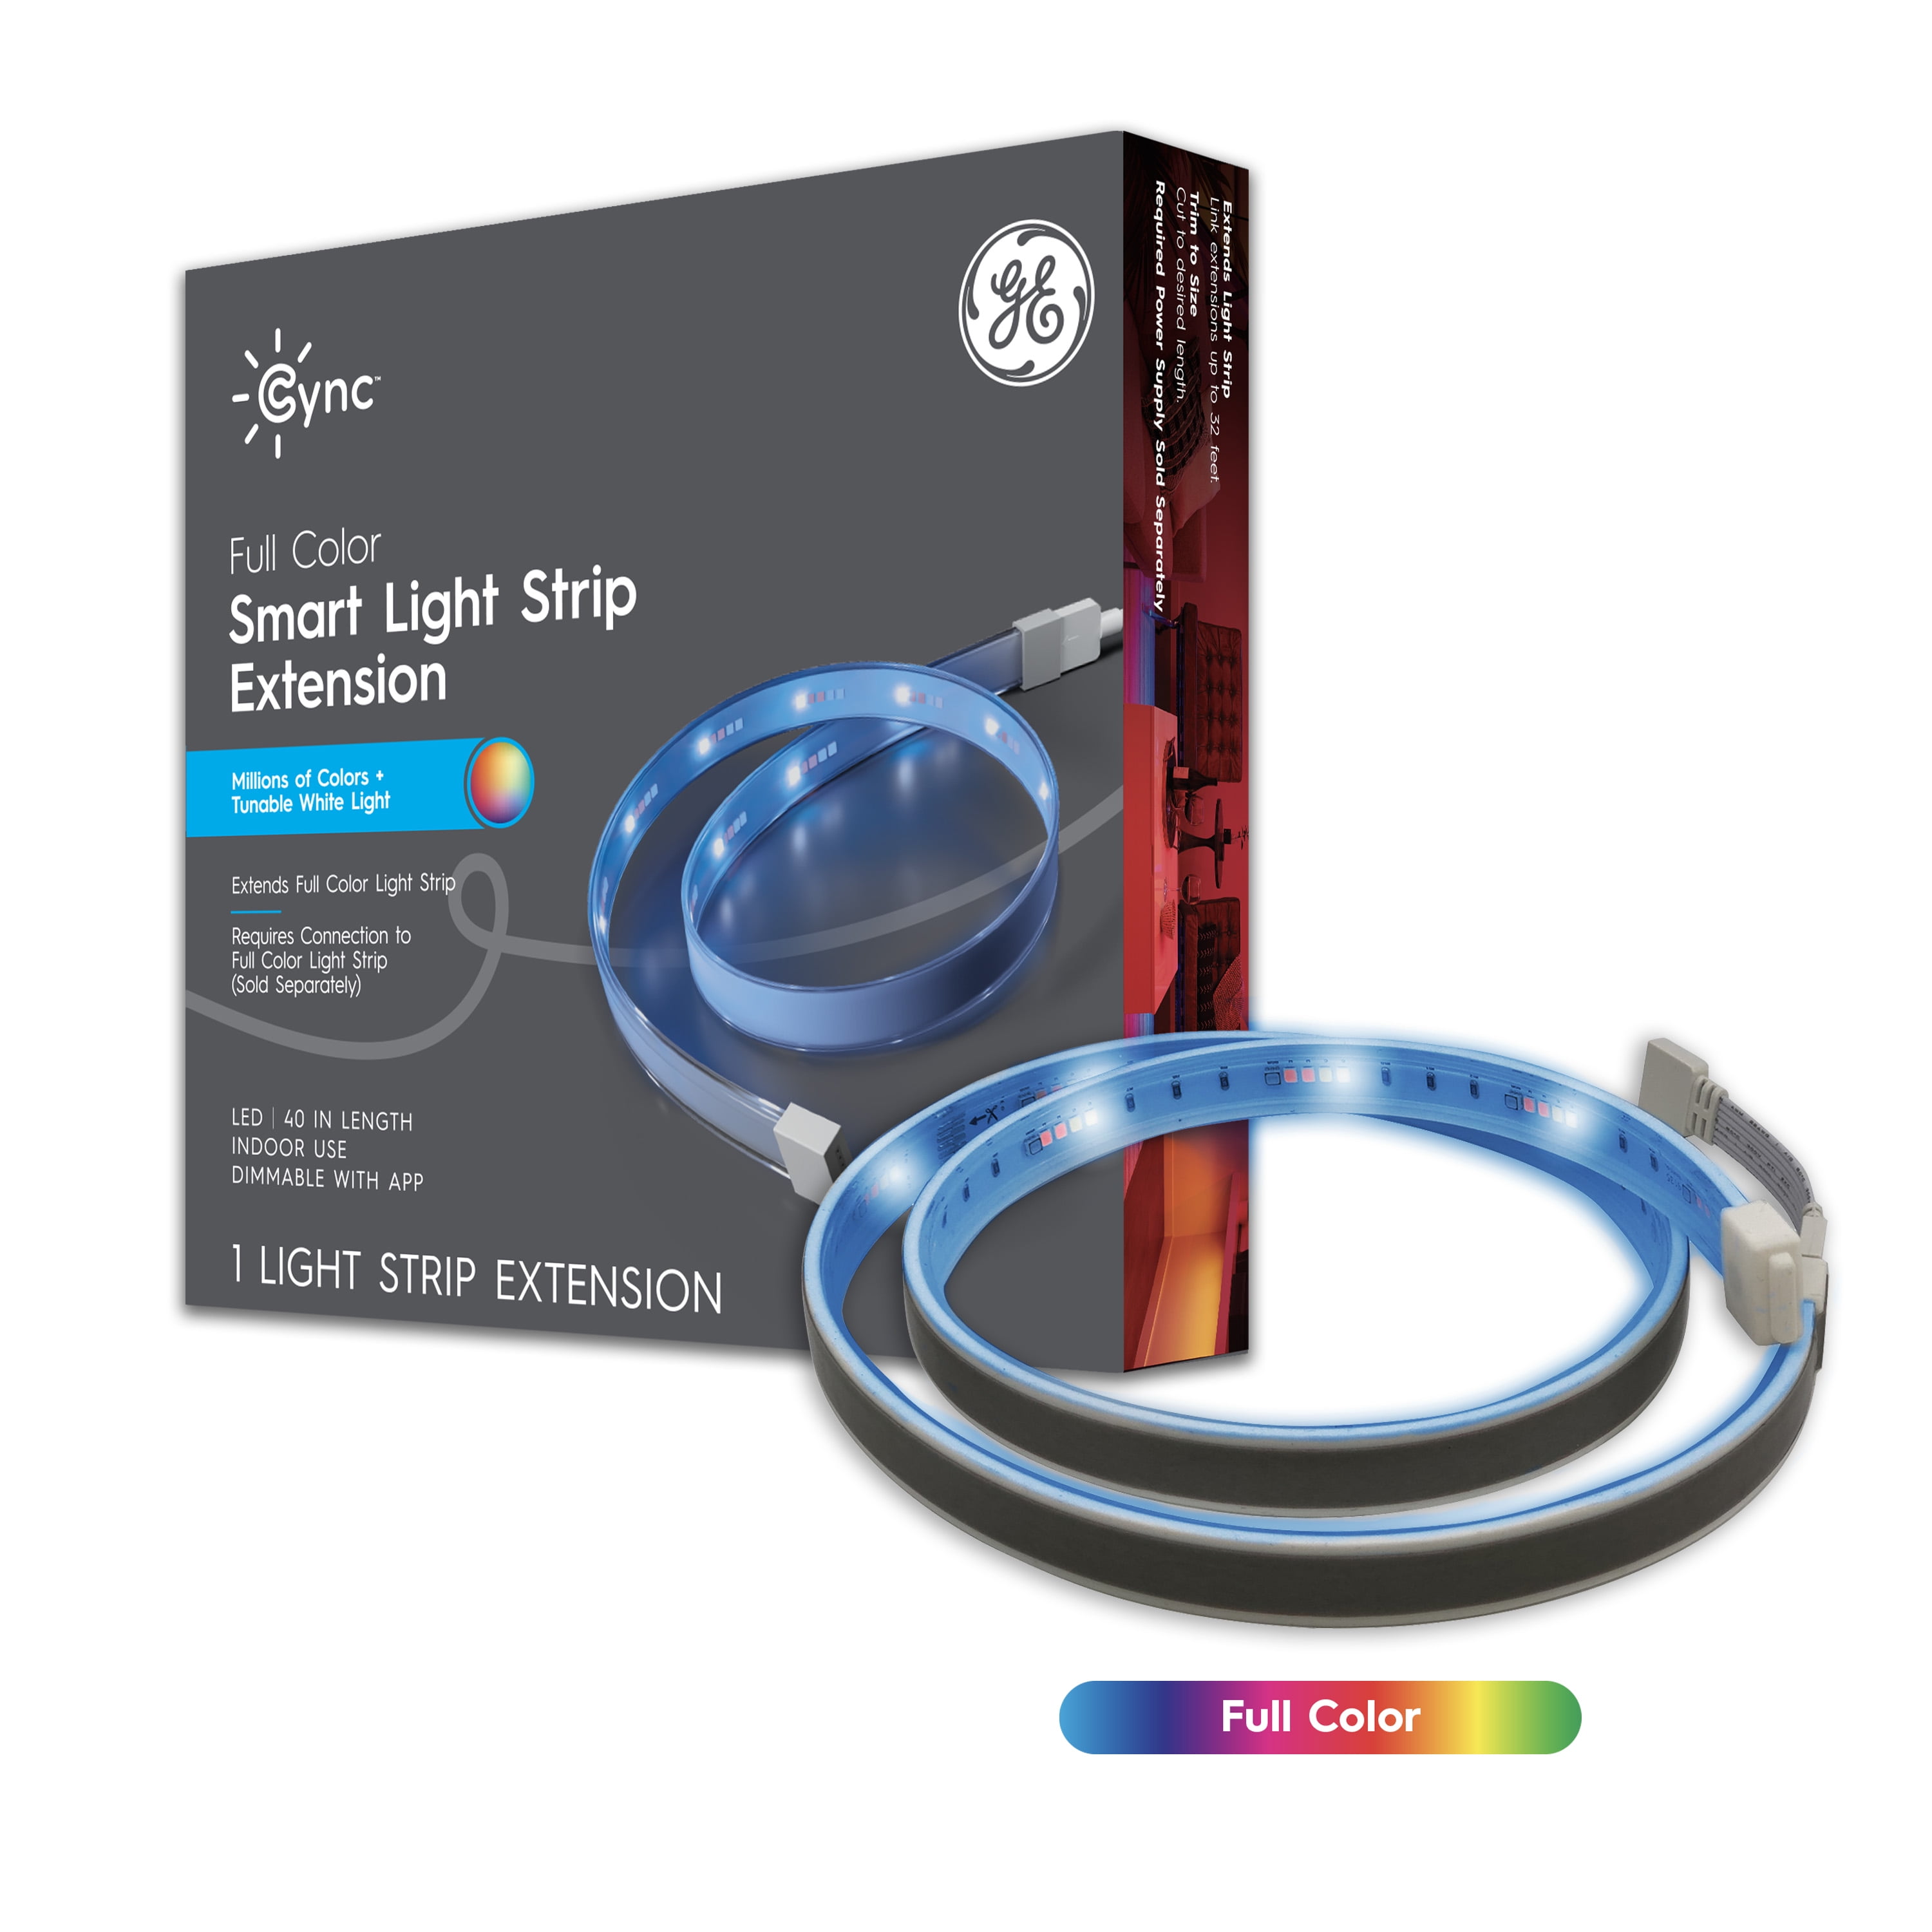 GE CYNC Smart LED Light Strip Extension, Full Color, Bluetooth and Wi-Fi Enabled, 40 inches